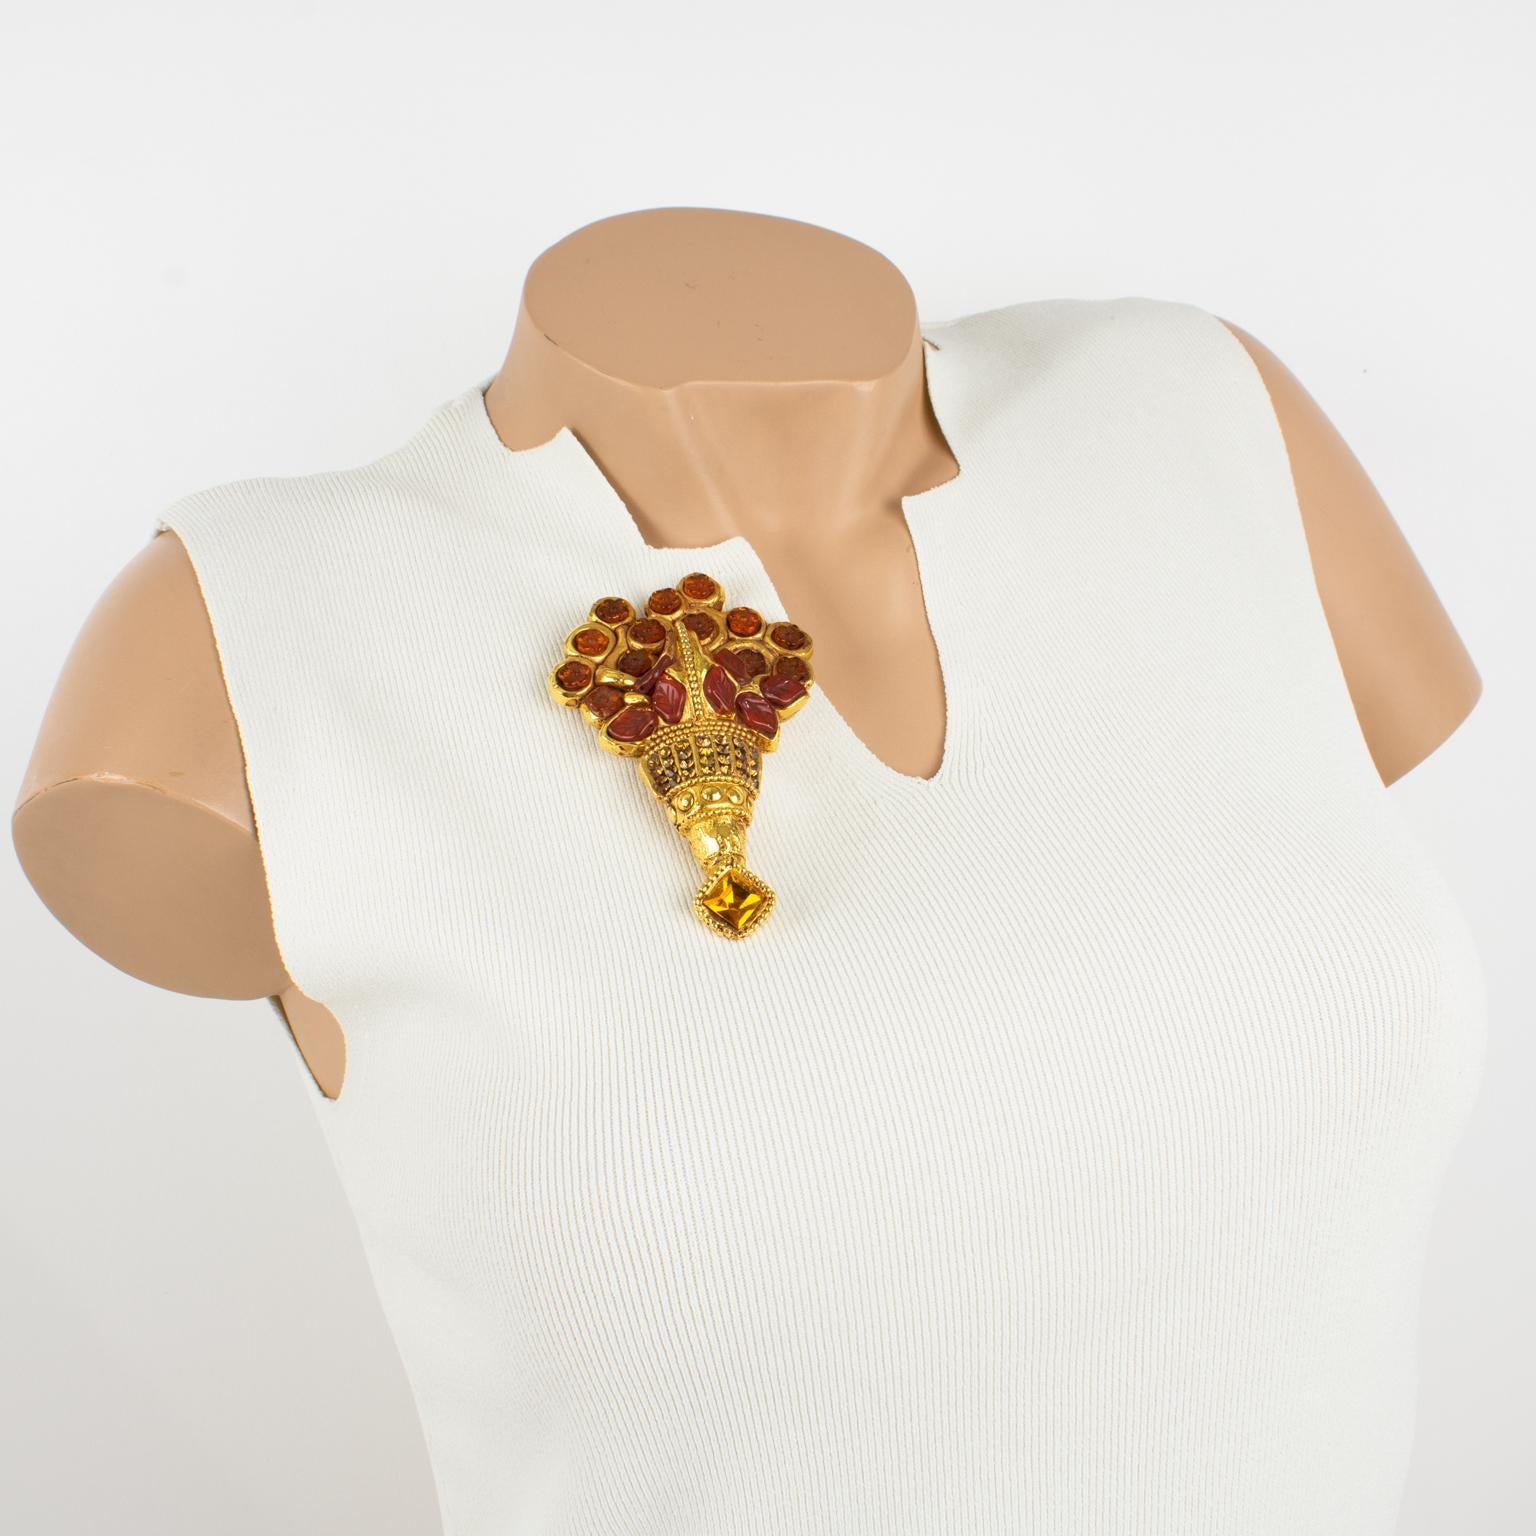 This lovely Kalinger Paris pin brooch features a massive dimensional bunch of flowers made of gold-plated coated resin, all carved and textured and ornate with resin cabochons and crystal rhinestones. The pin boasts burnt orange, red rust, and